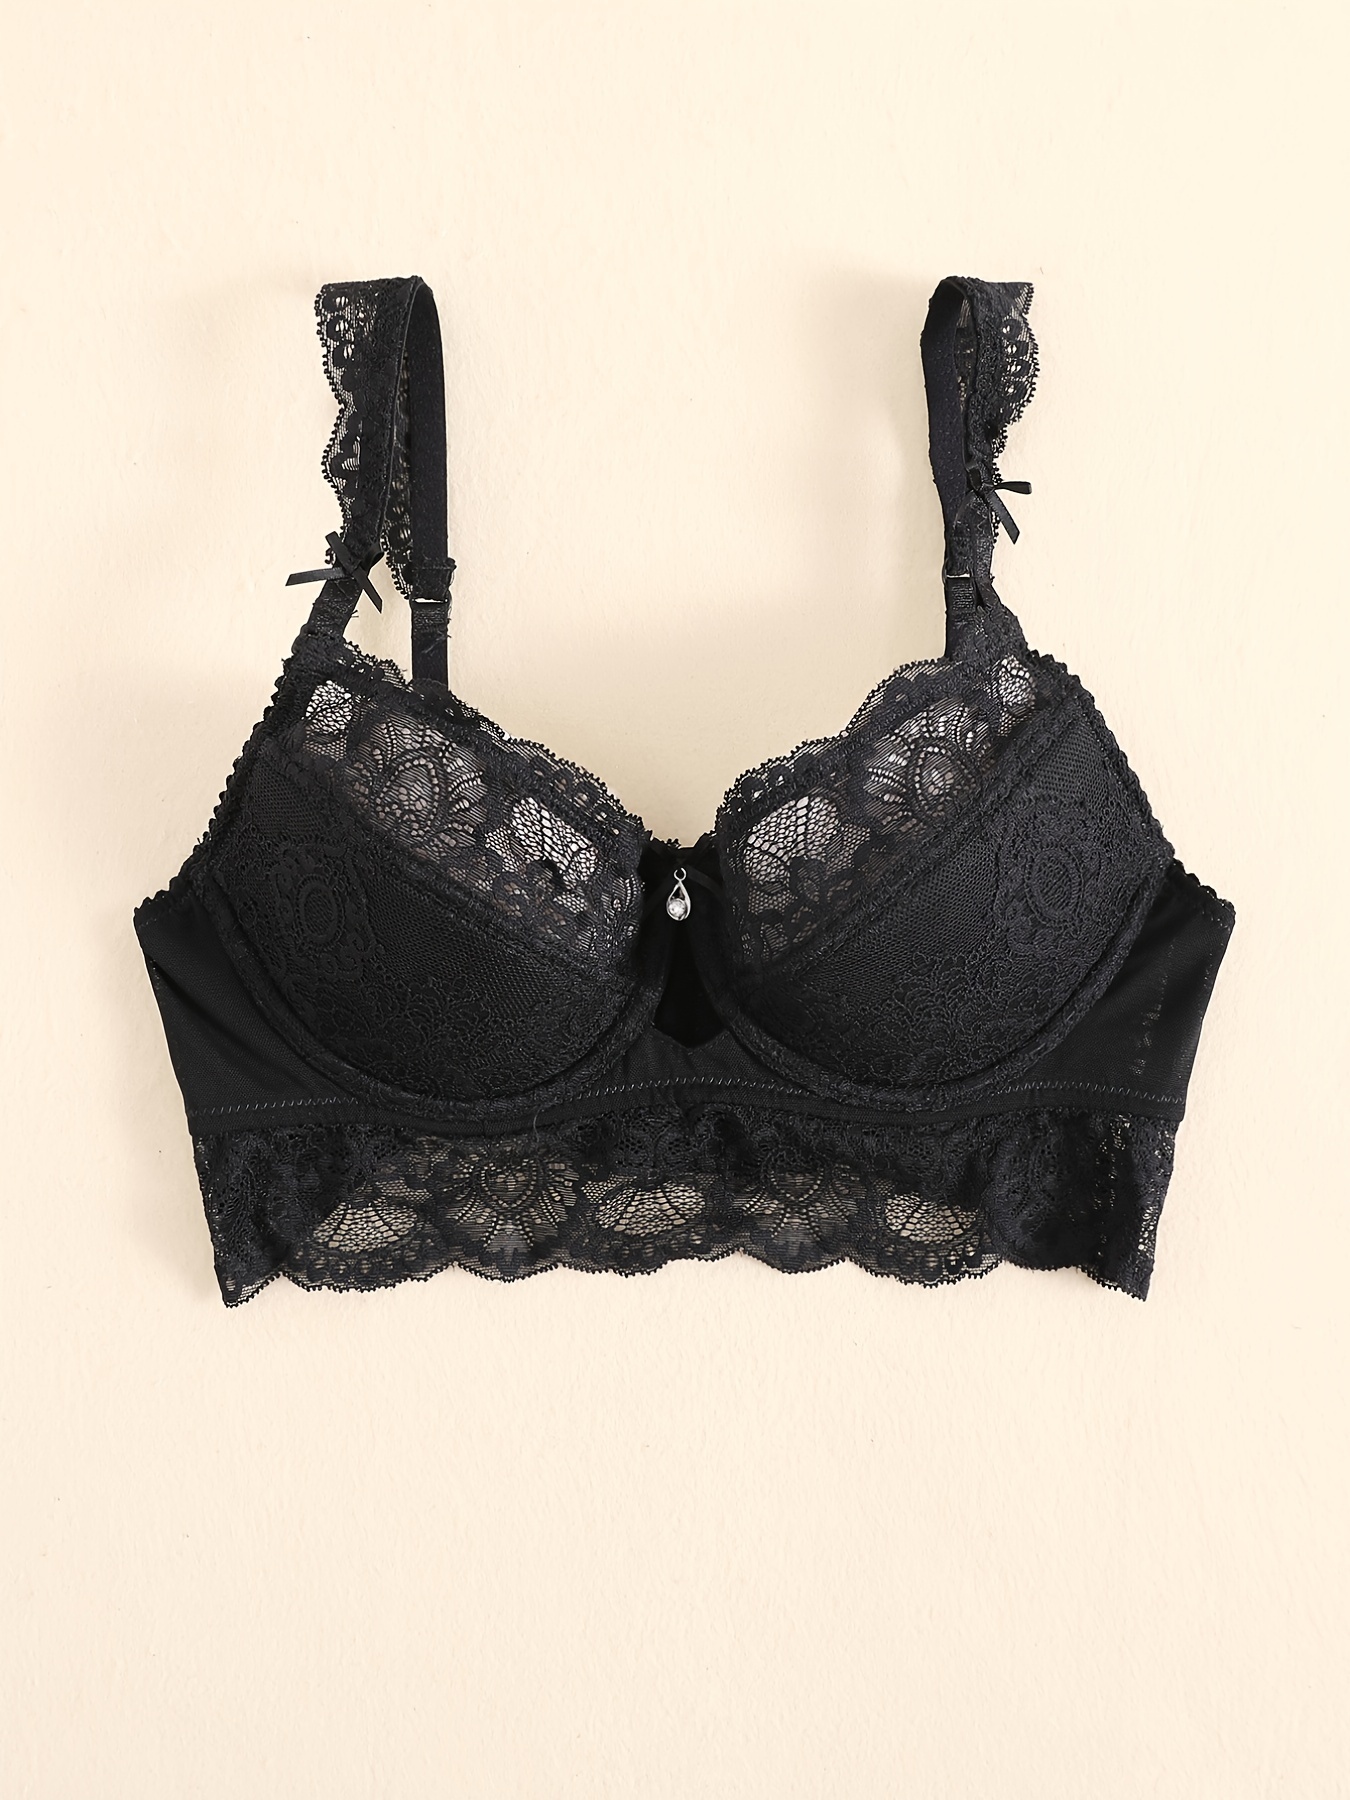 Black Lace Pocket Bra ideal for oval/semi rounds forms